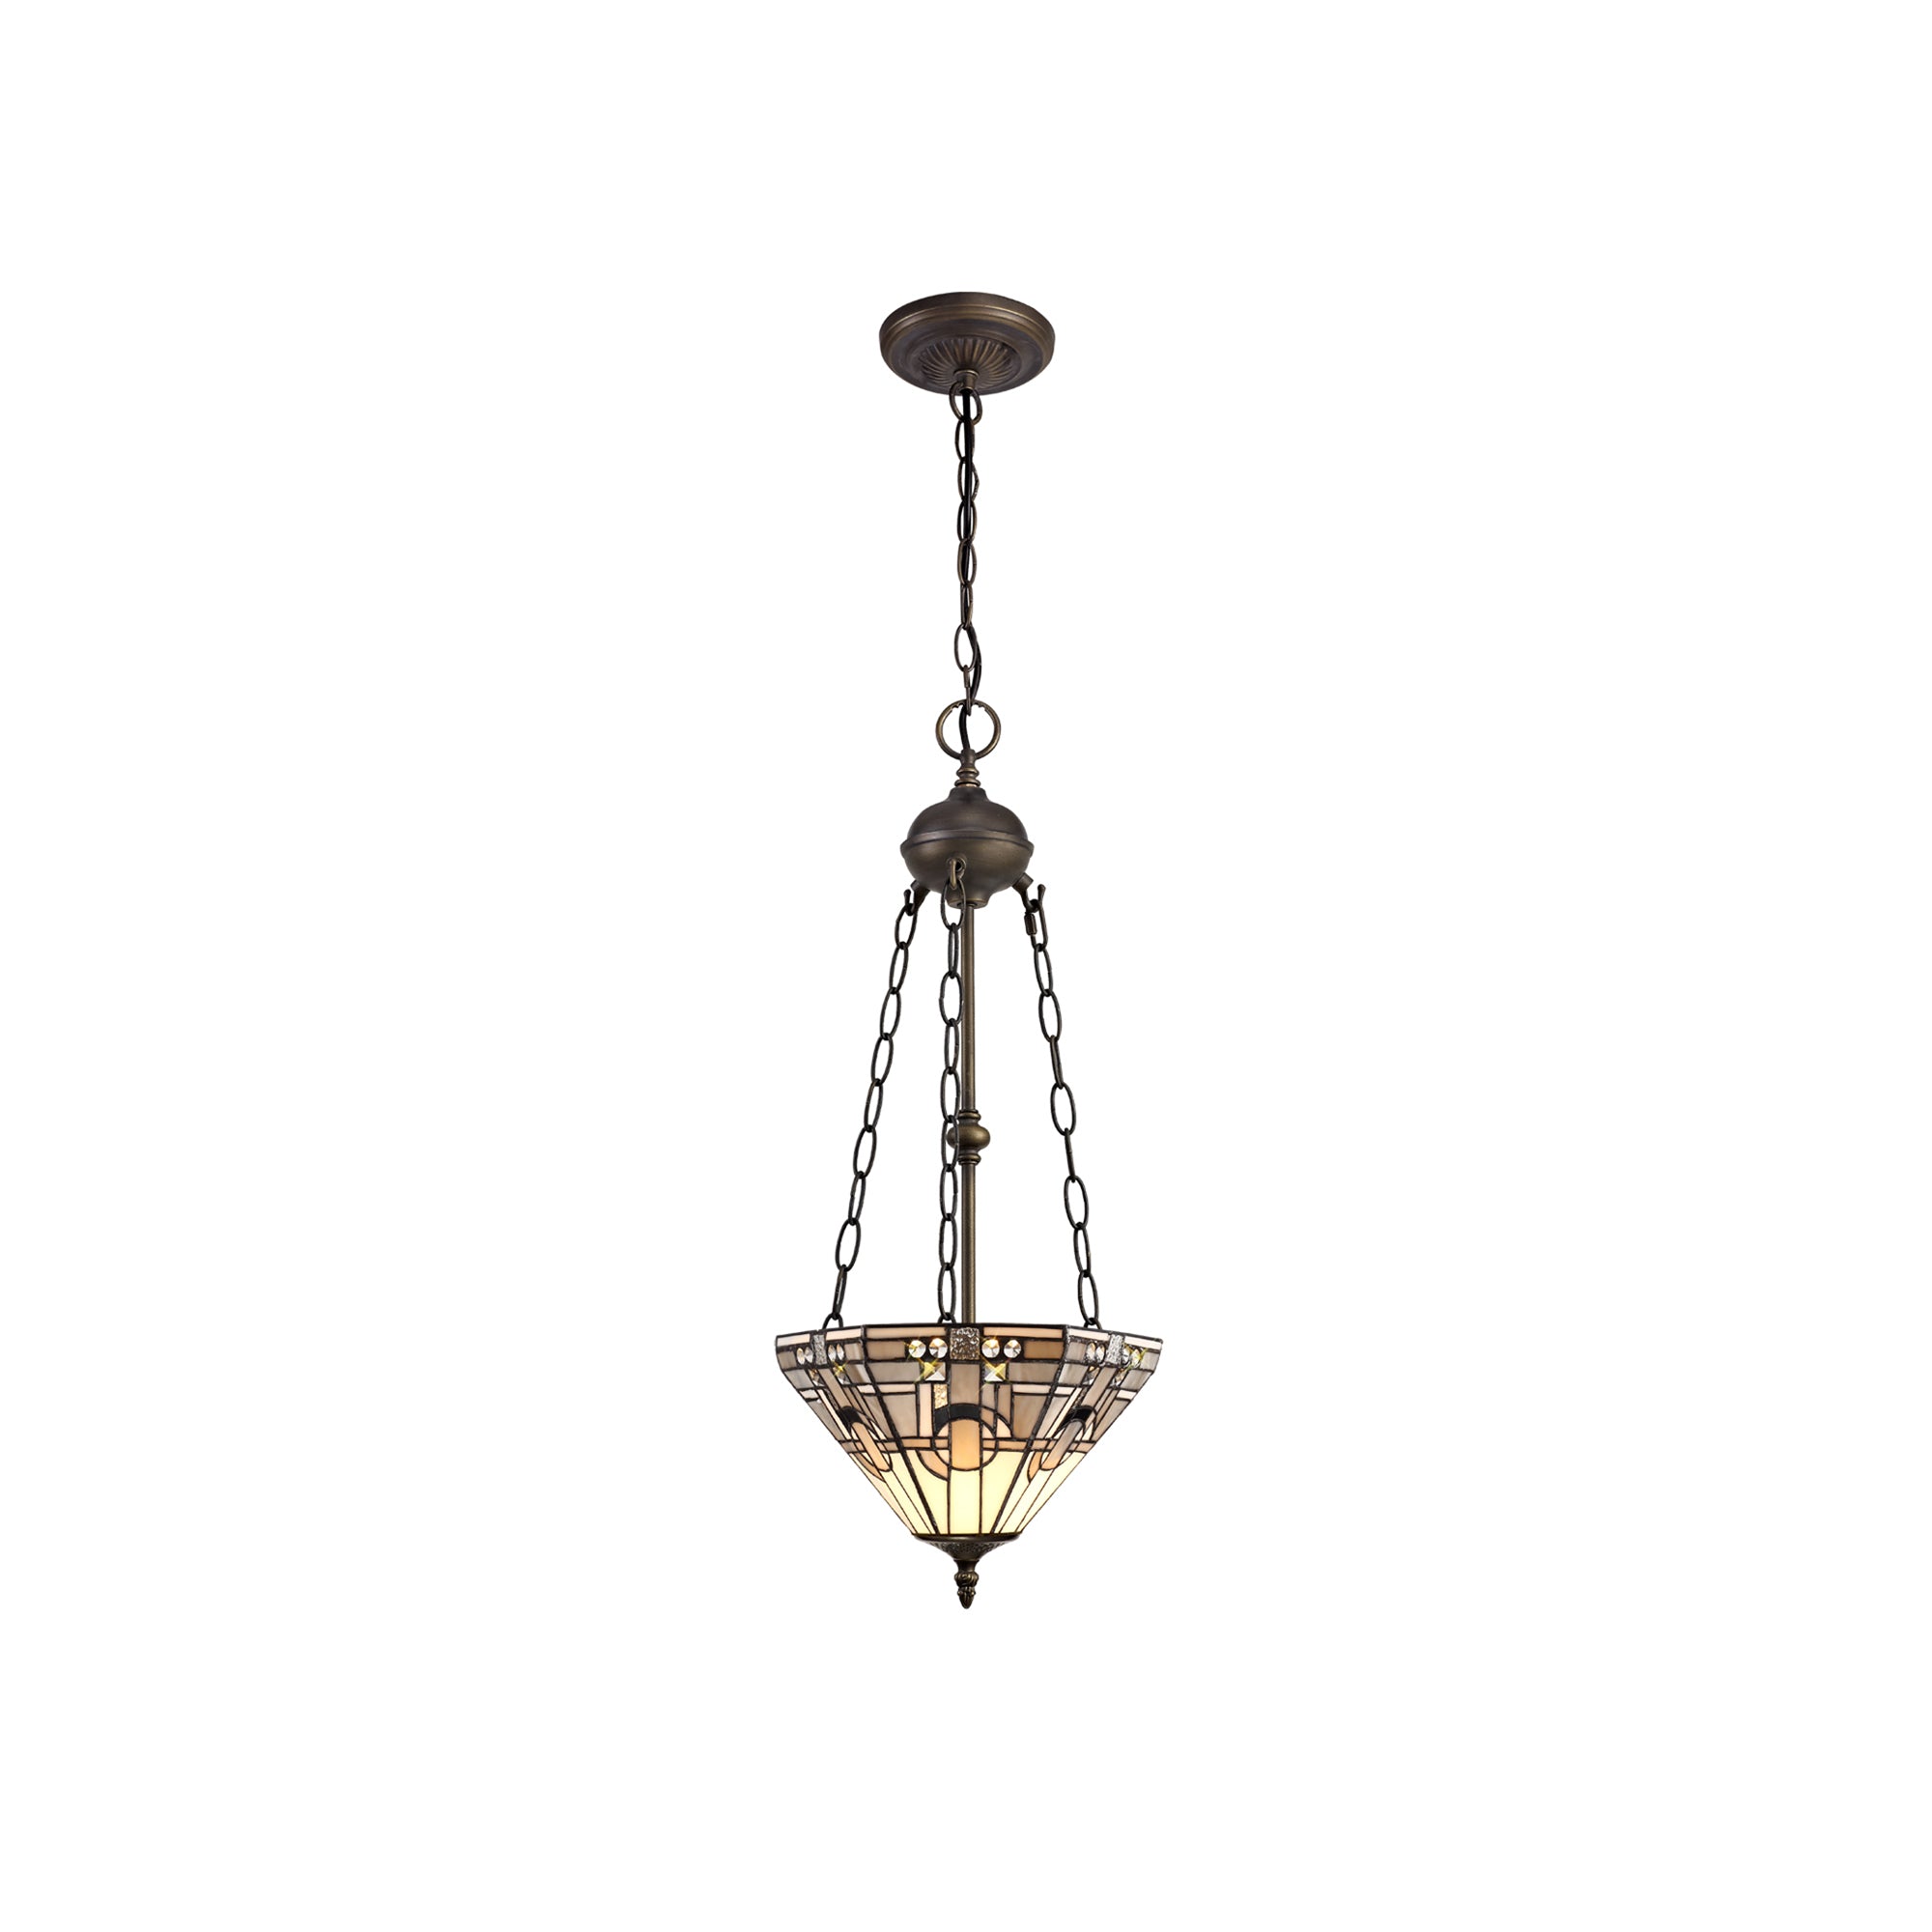 Atek 2 Light tiffany Uplighter Pendant E27 With 30cm Tiffany Shade, White/Grey/Black/Clear Crystal/Aged Antique Brass